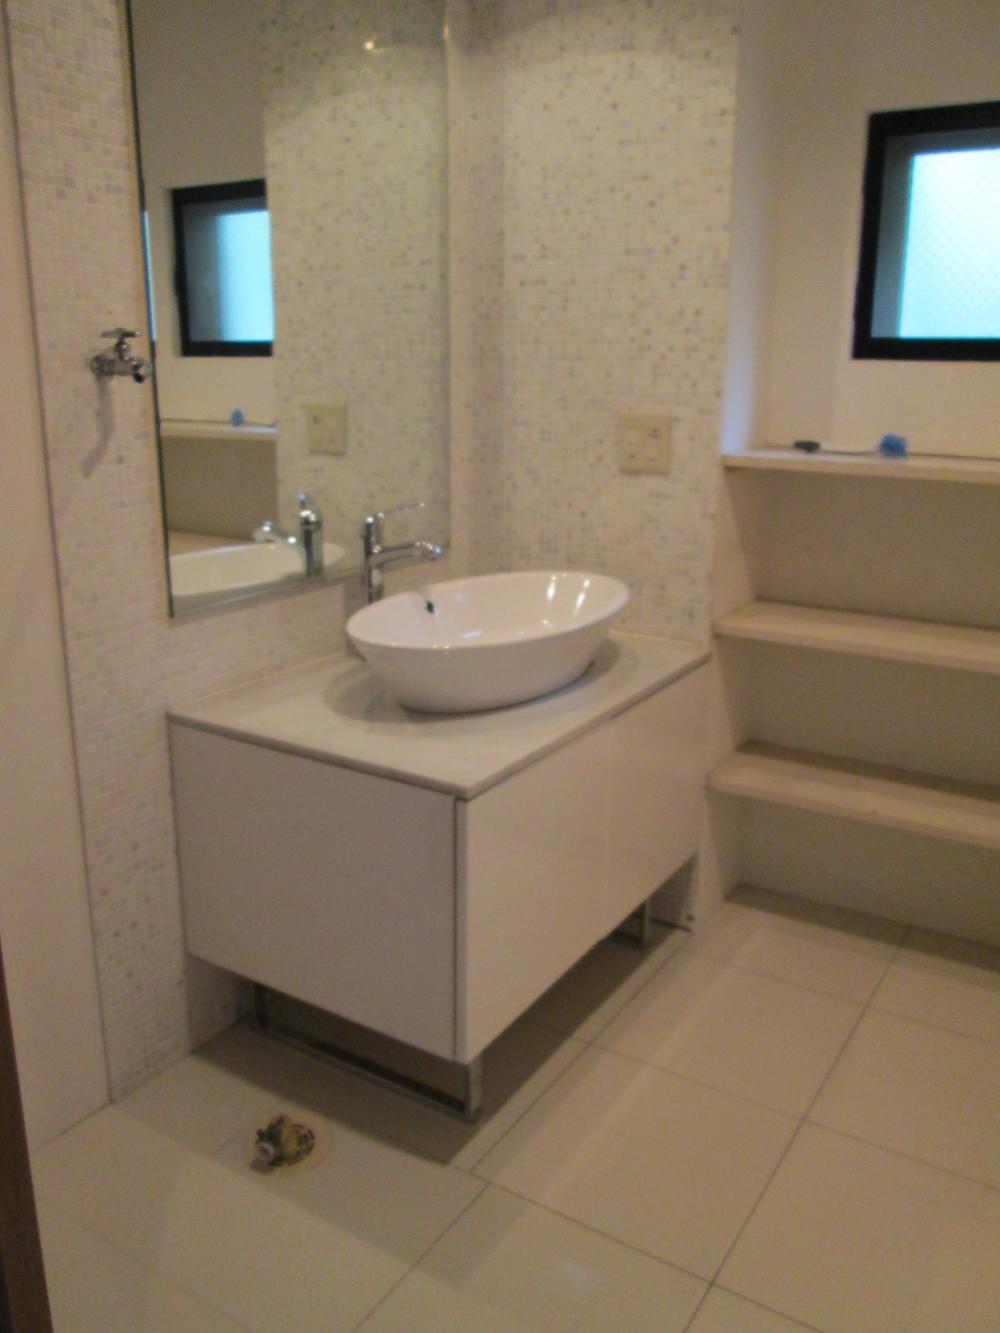 Wash basin, toilet. It is widely easy-to-use also washstand